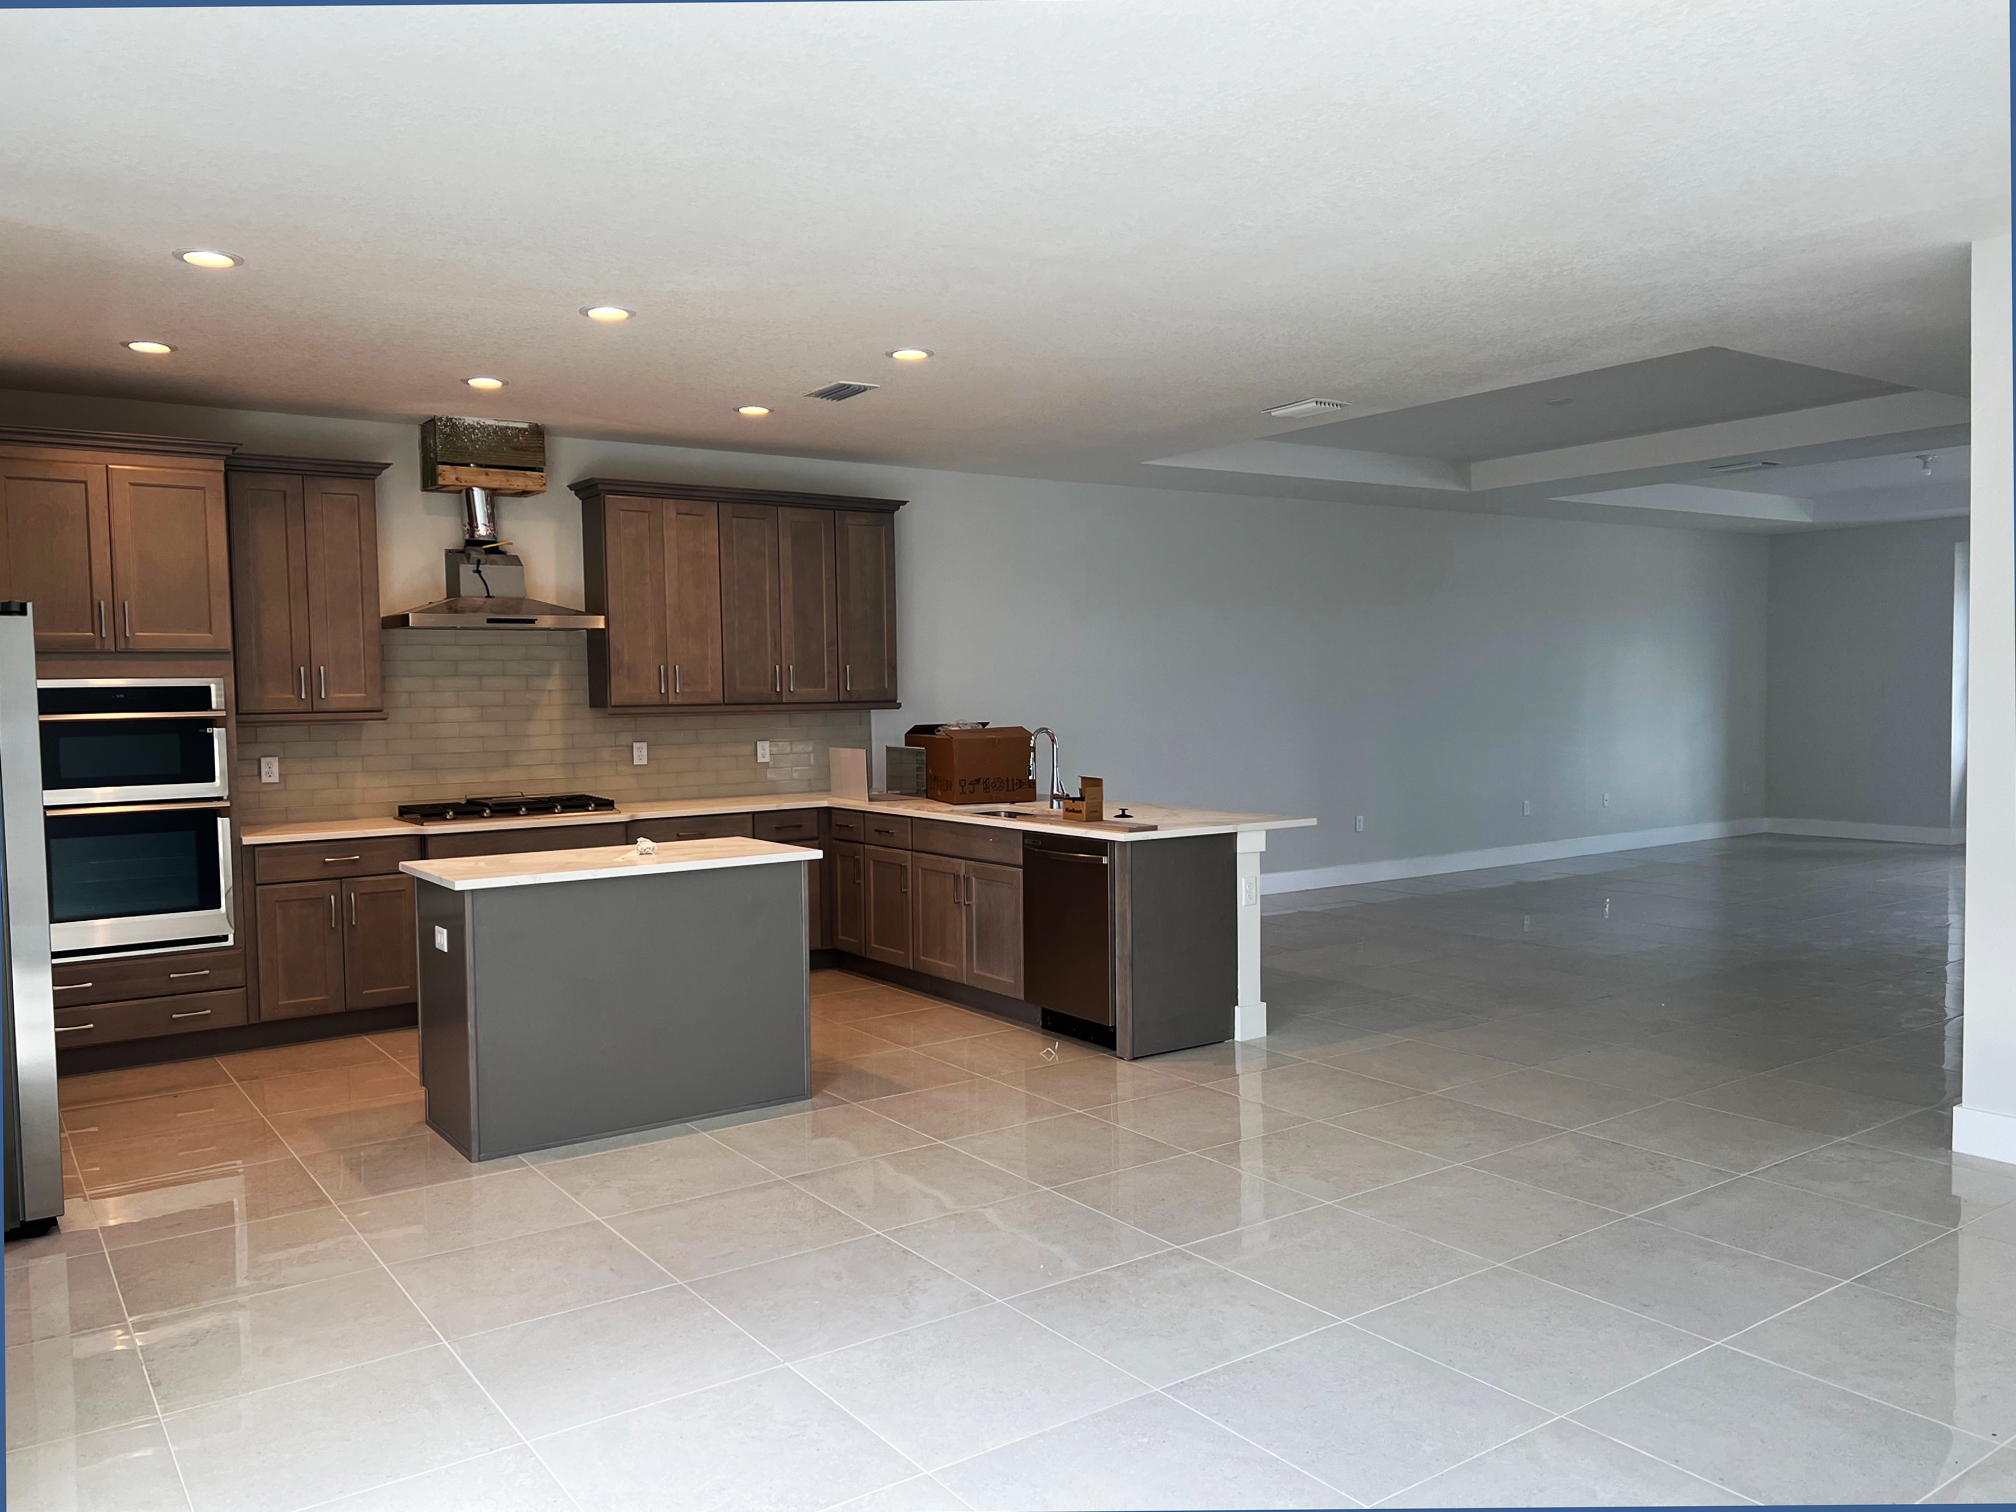 Pigeon Plum Townhome Island, Hood and Breakfast Bar. Tray Ceiling in Dining and Living Room